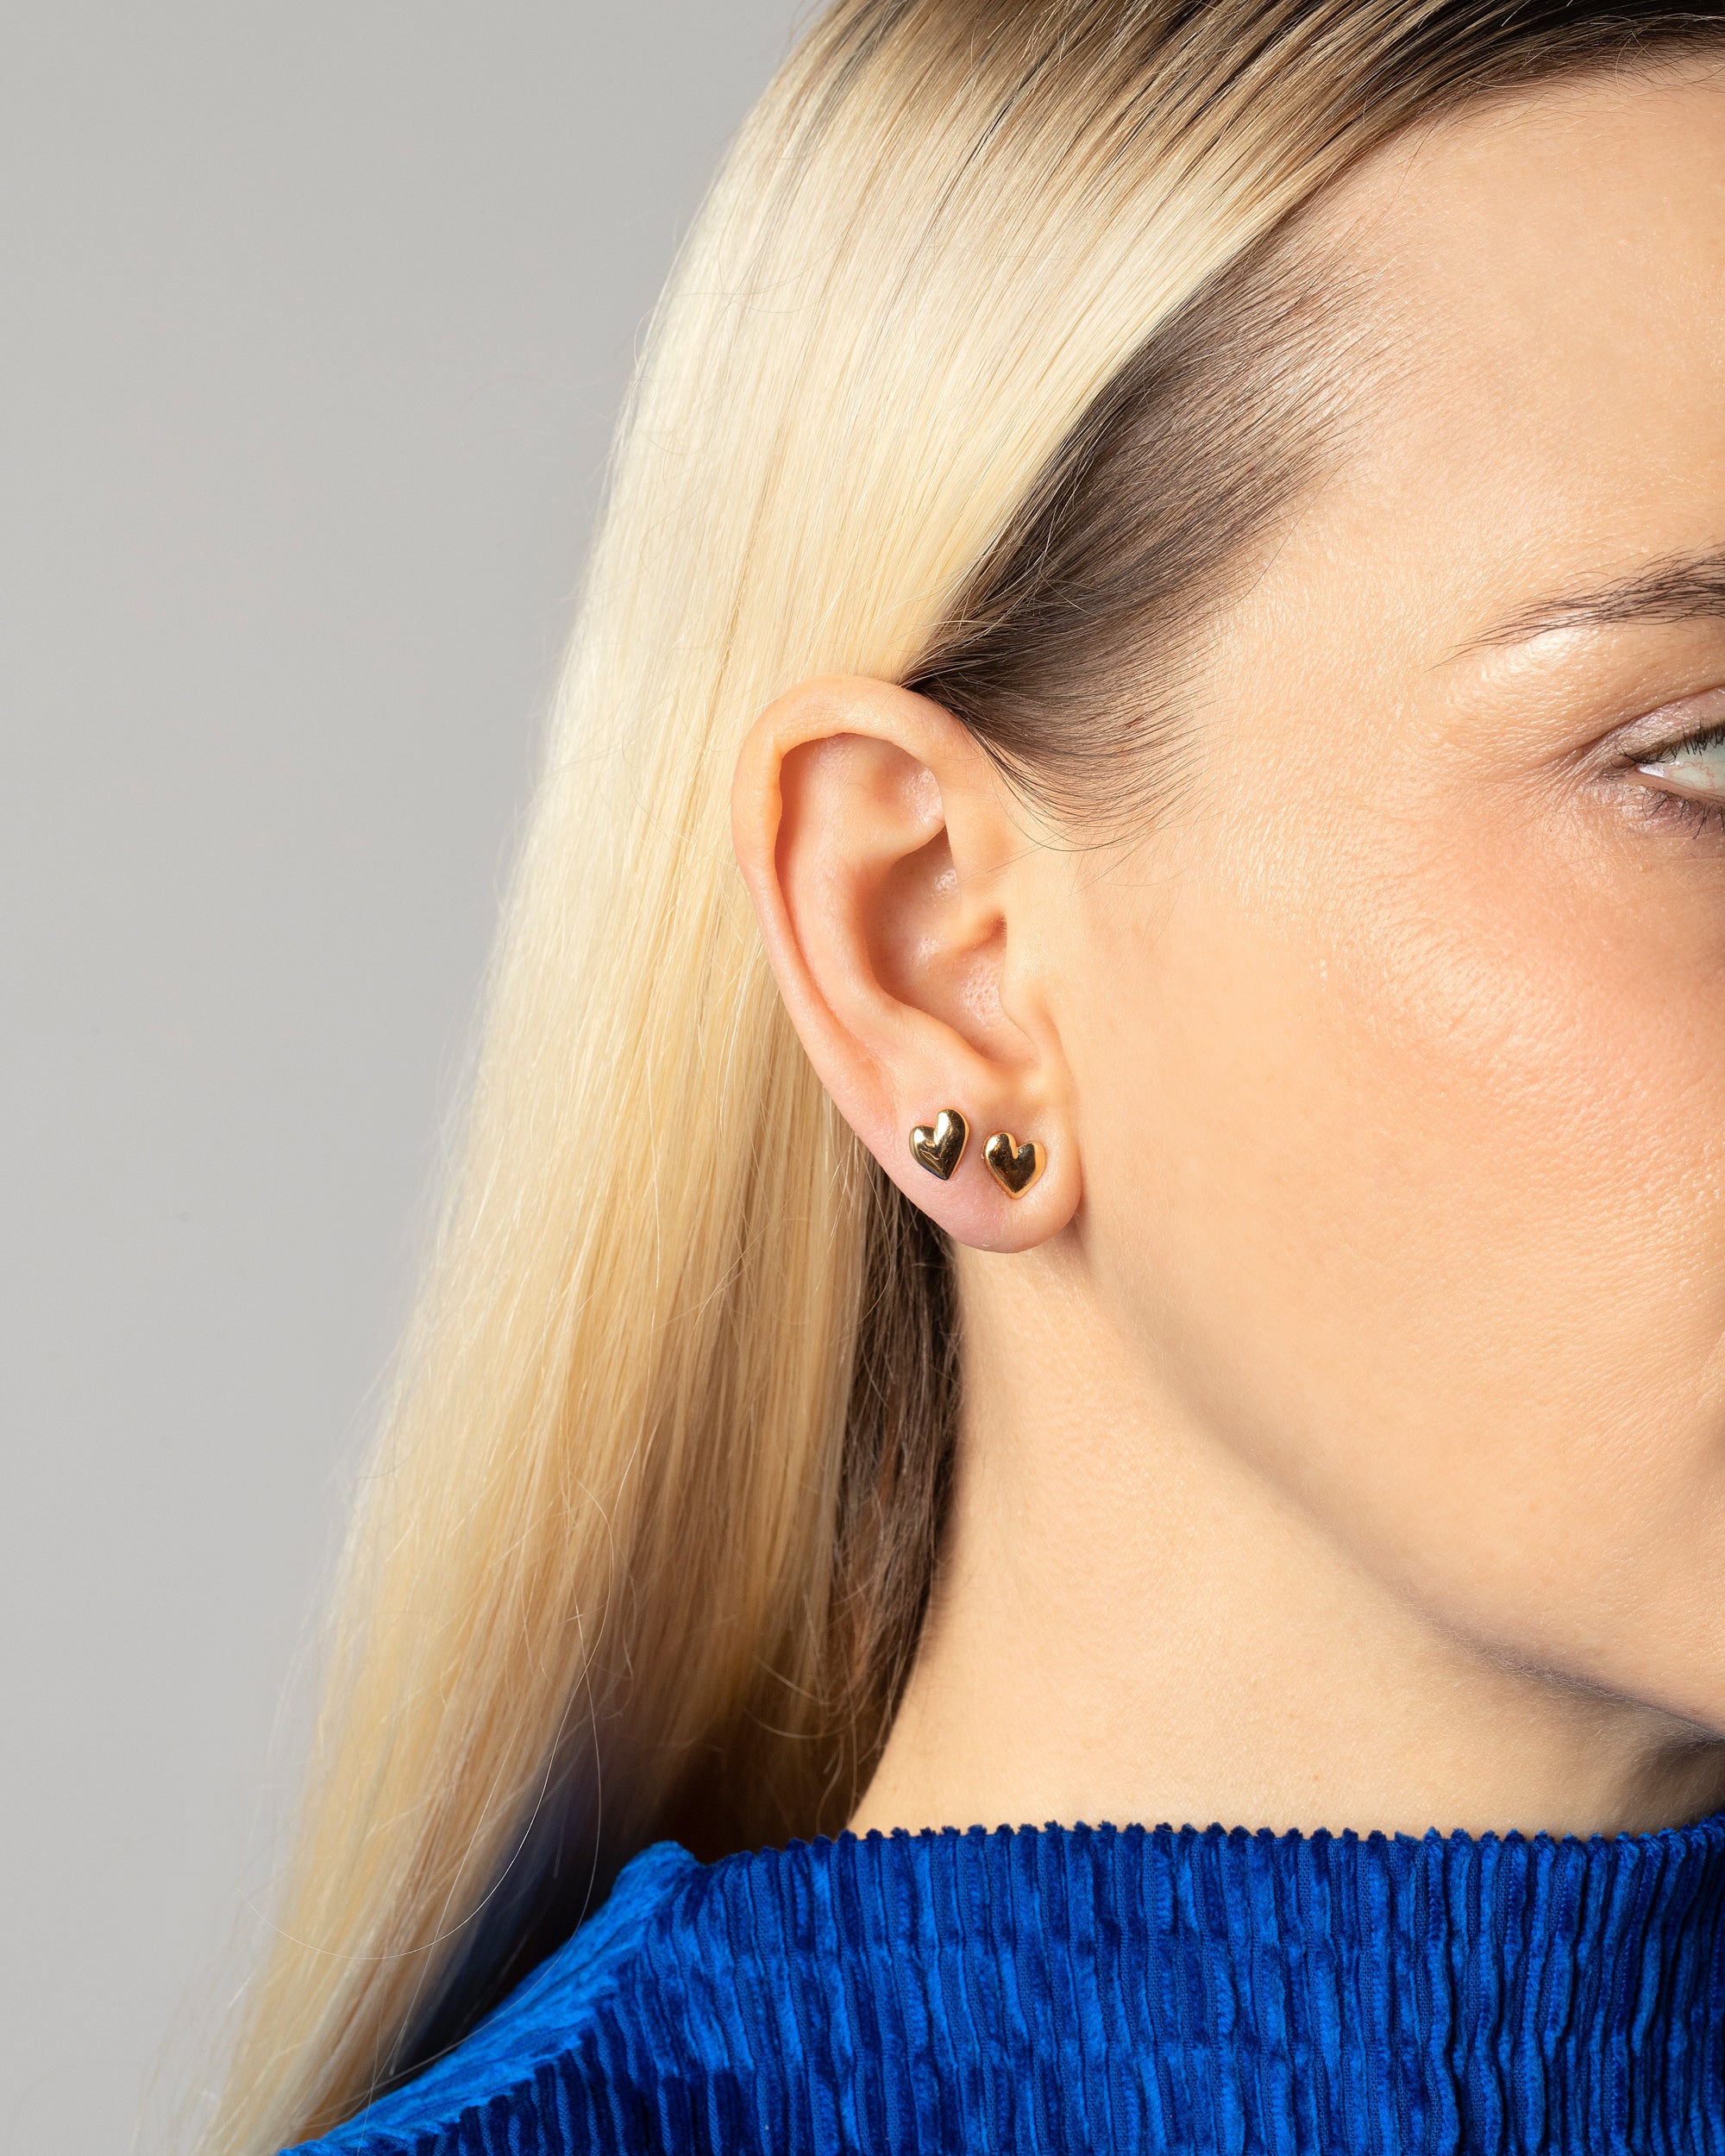 Inspire your style – One earring!